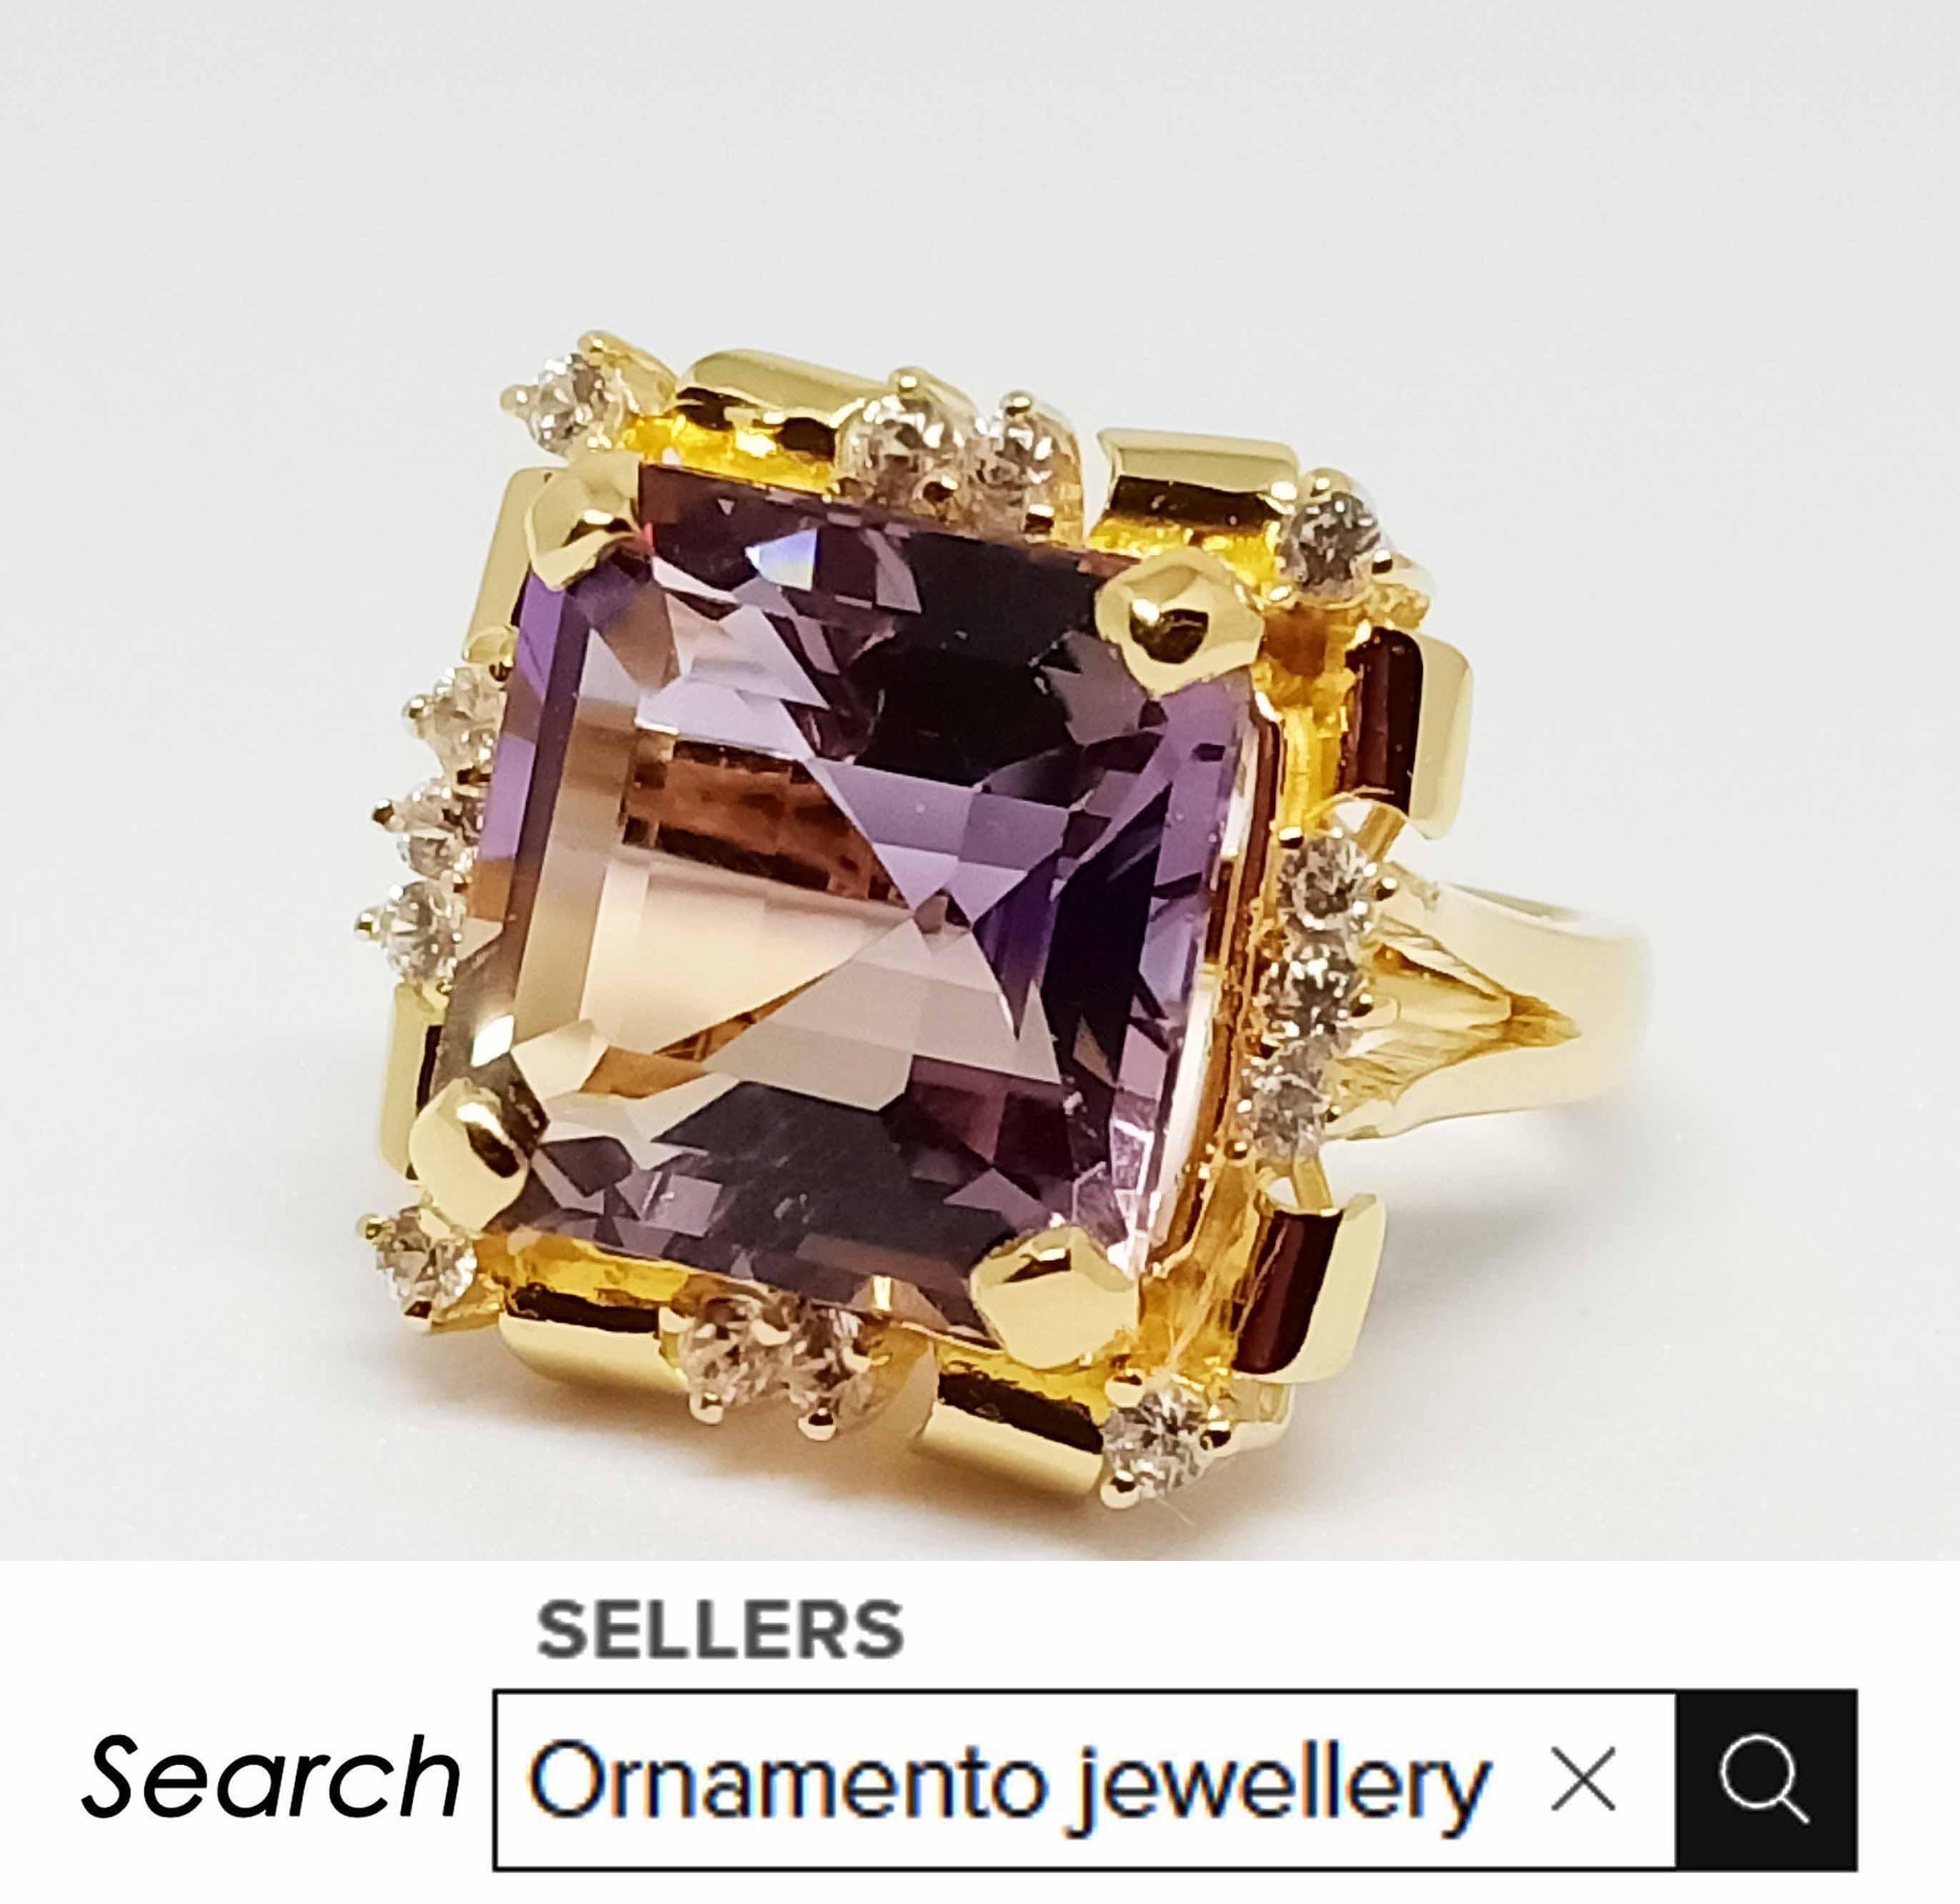 Octagon Cut (15.89cts)Ametrine Ring sterling silver on 18K Gold Plated. For Sale